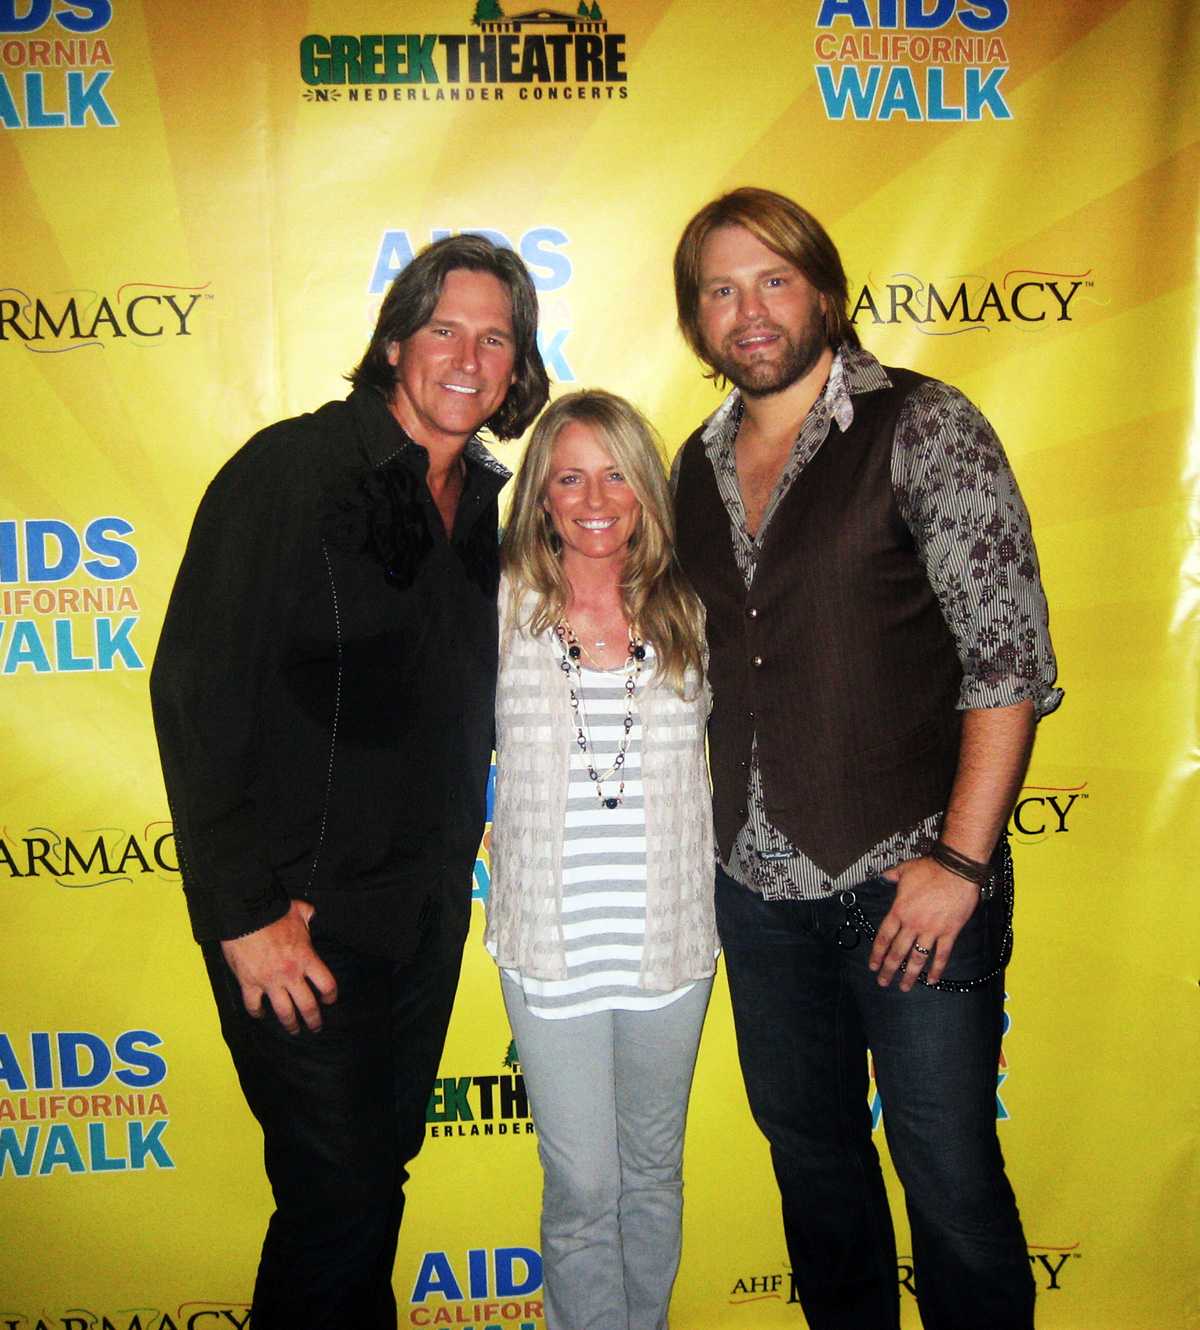 Billy Dean, Deana Carter and James Otto performed at CA Aids Walk